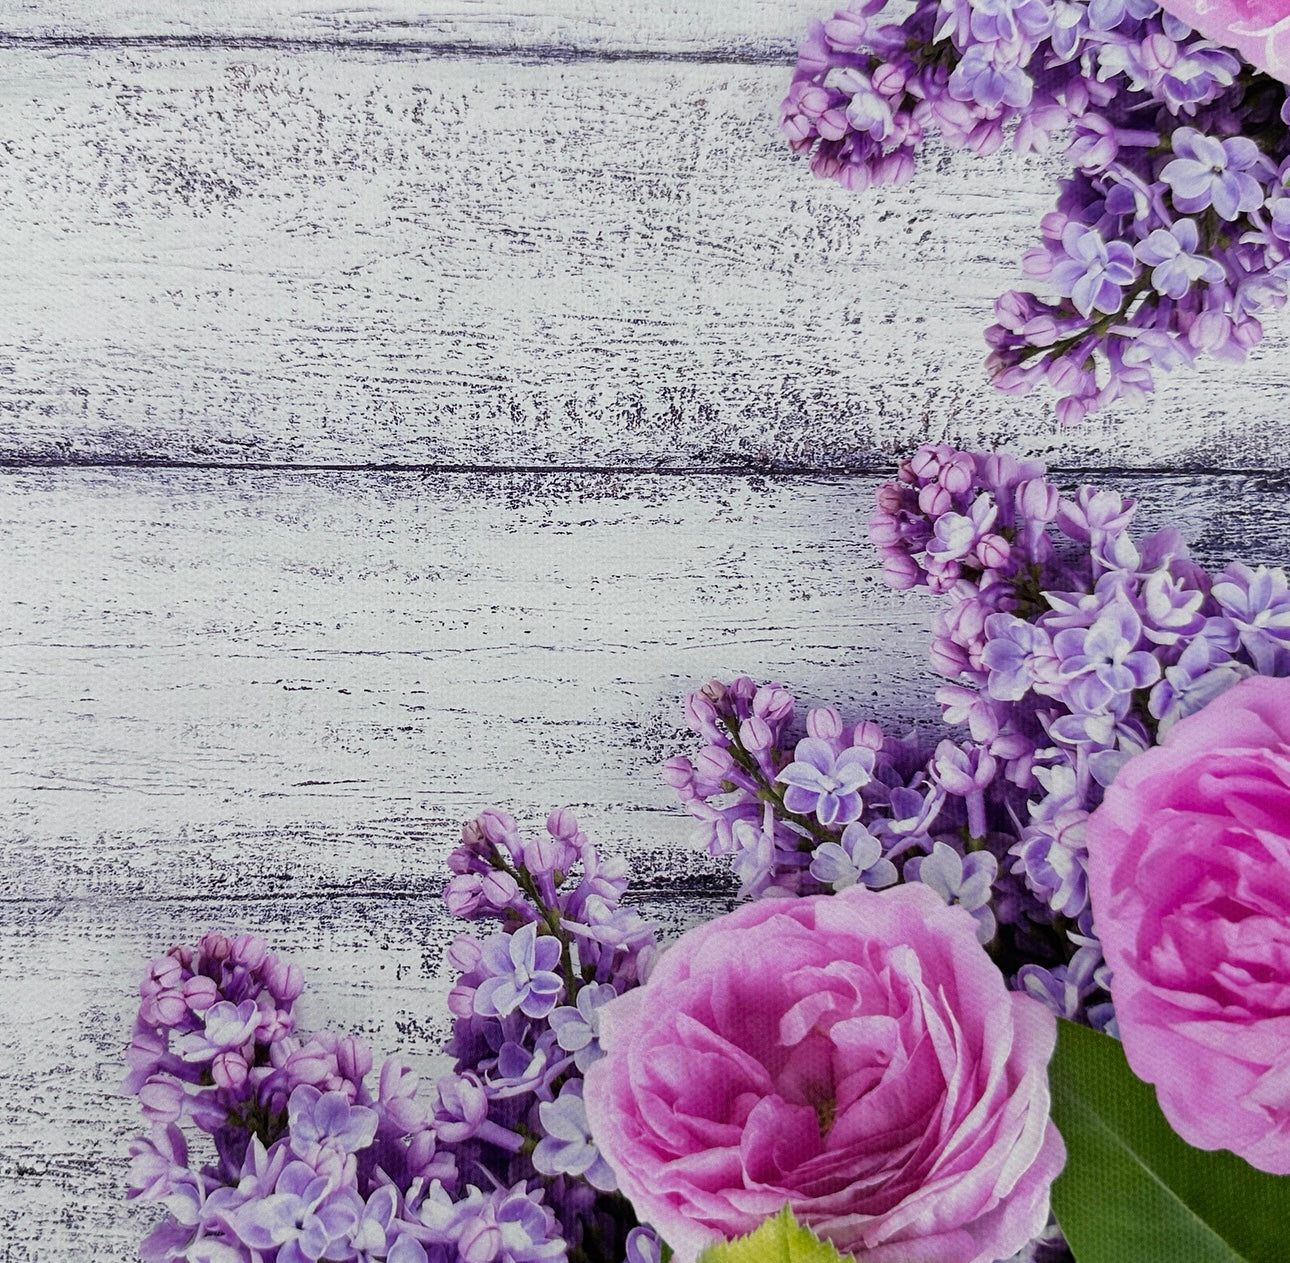 Lilac & Pink Rose Floral Wooden Canvas Photography Background